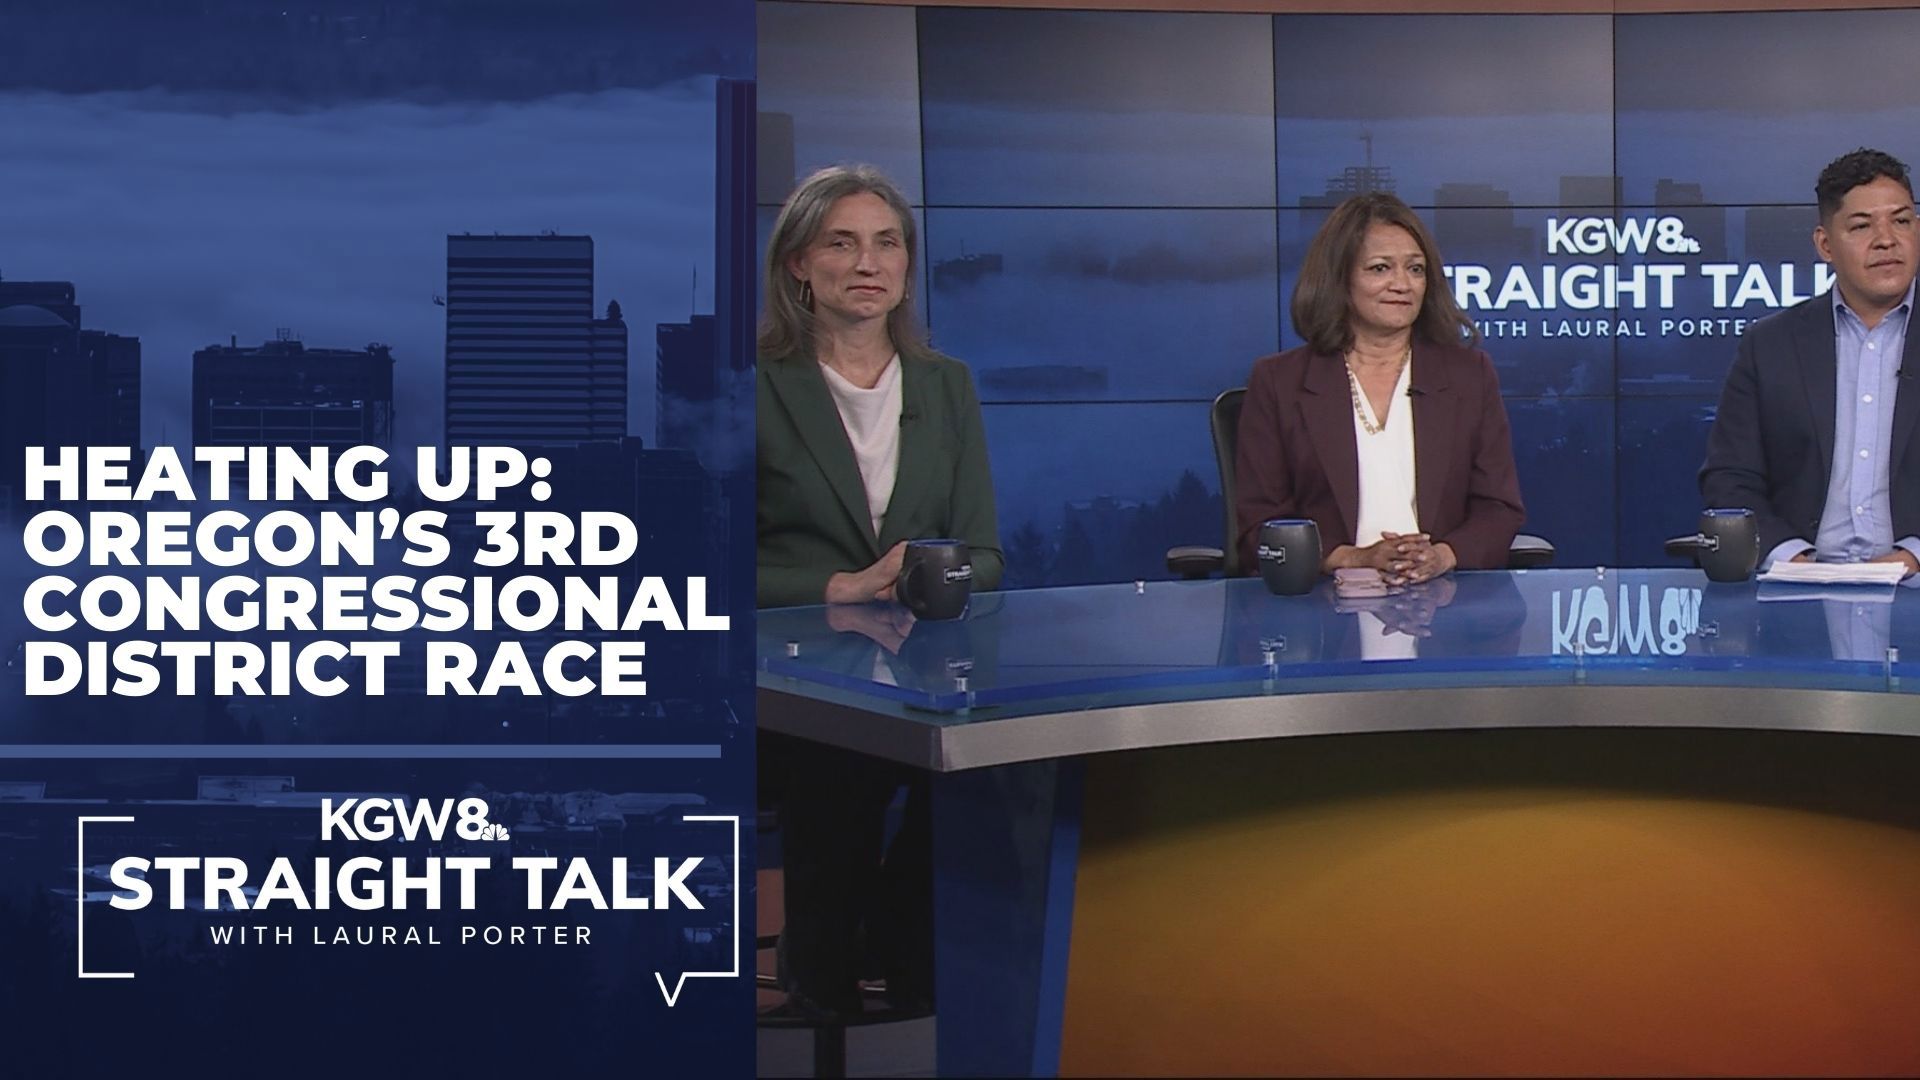 One of the most consequential and closely watched races coming up in Oregon's primary election is the Democratic race for the third congressional district.